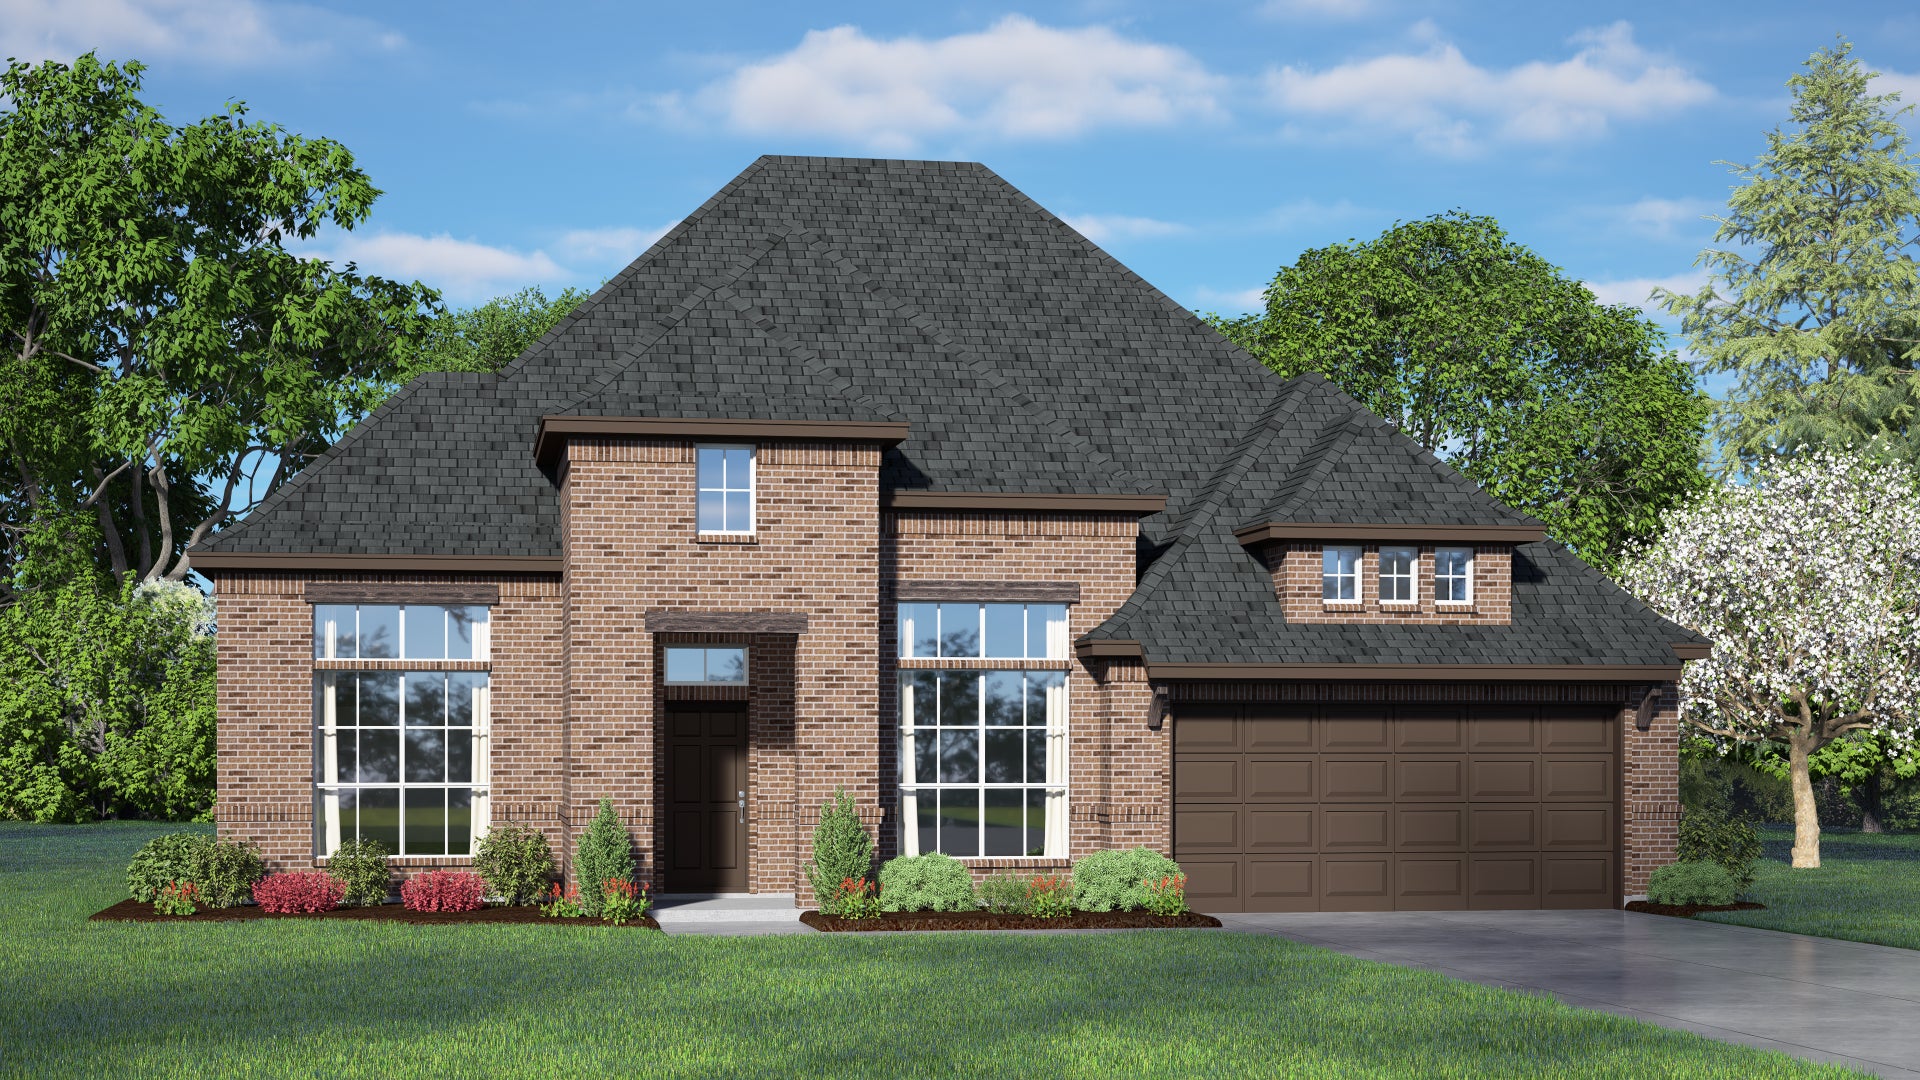 2622 C. 4br New Home in Joshua, TX